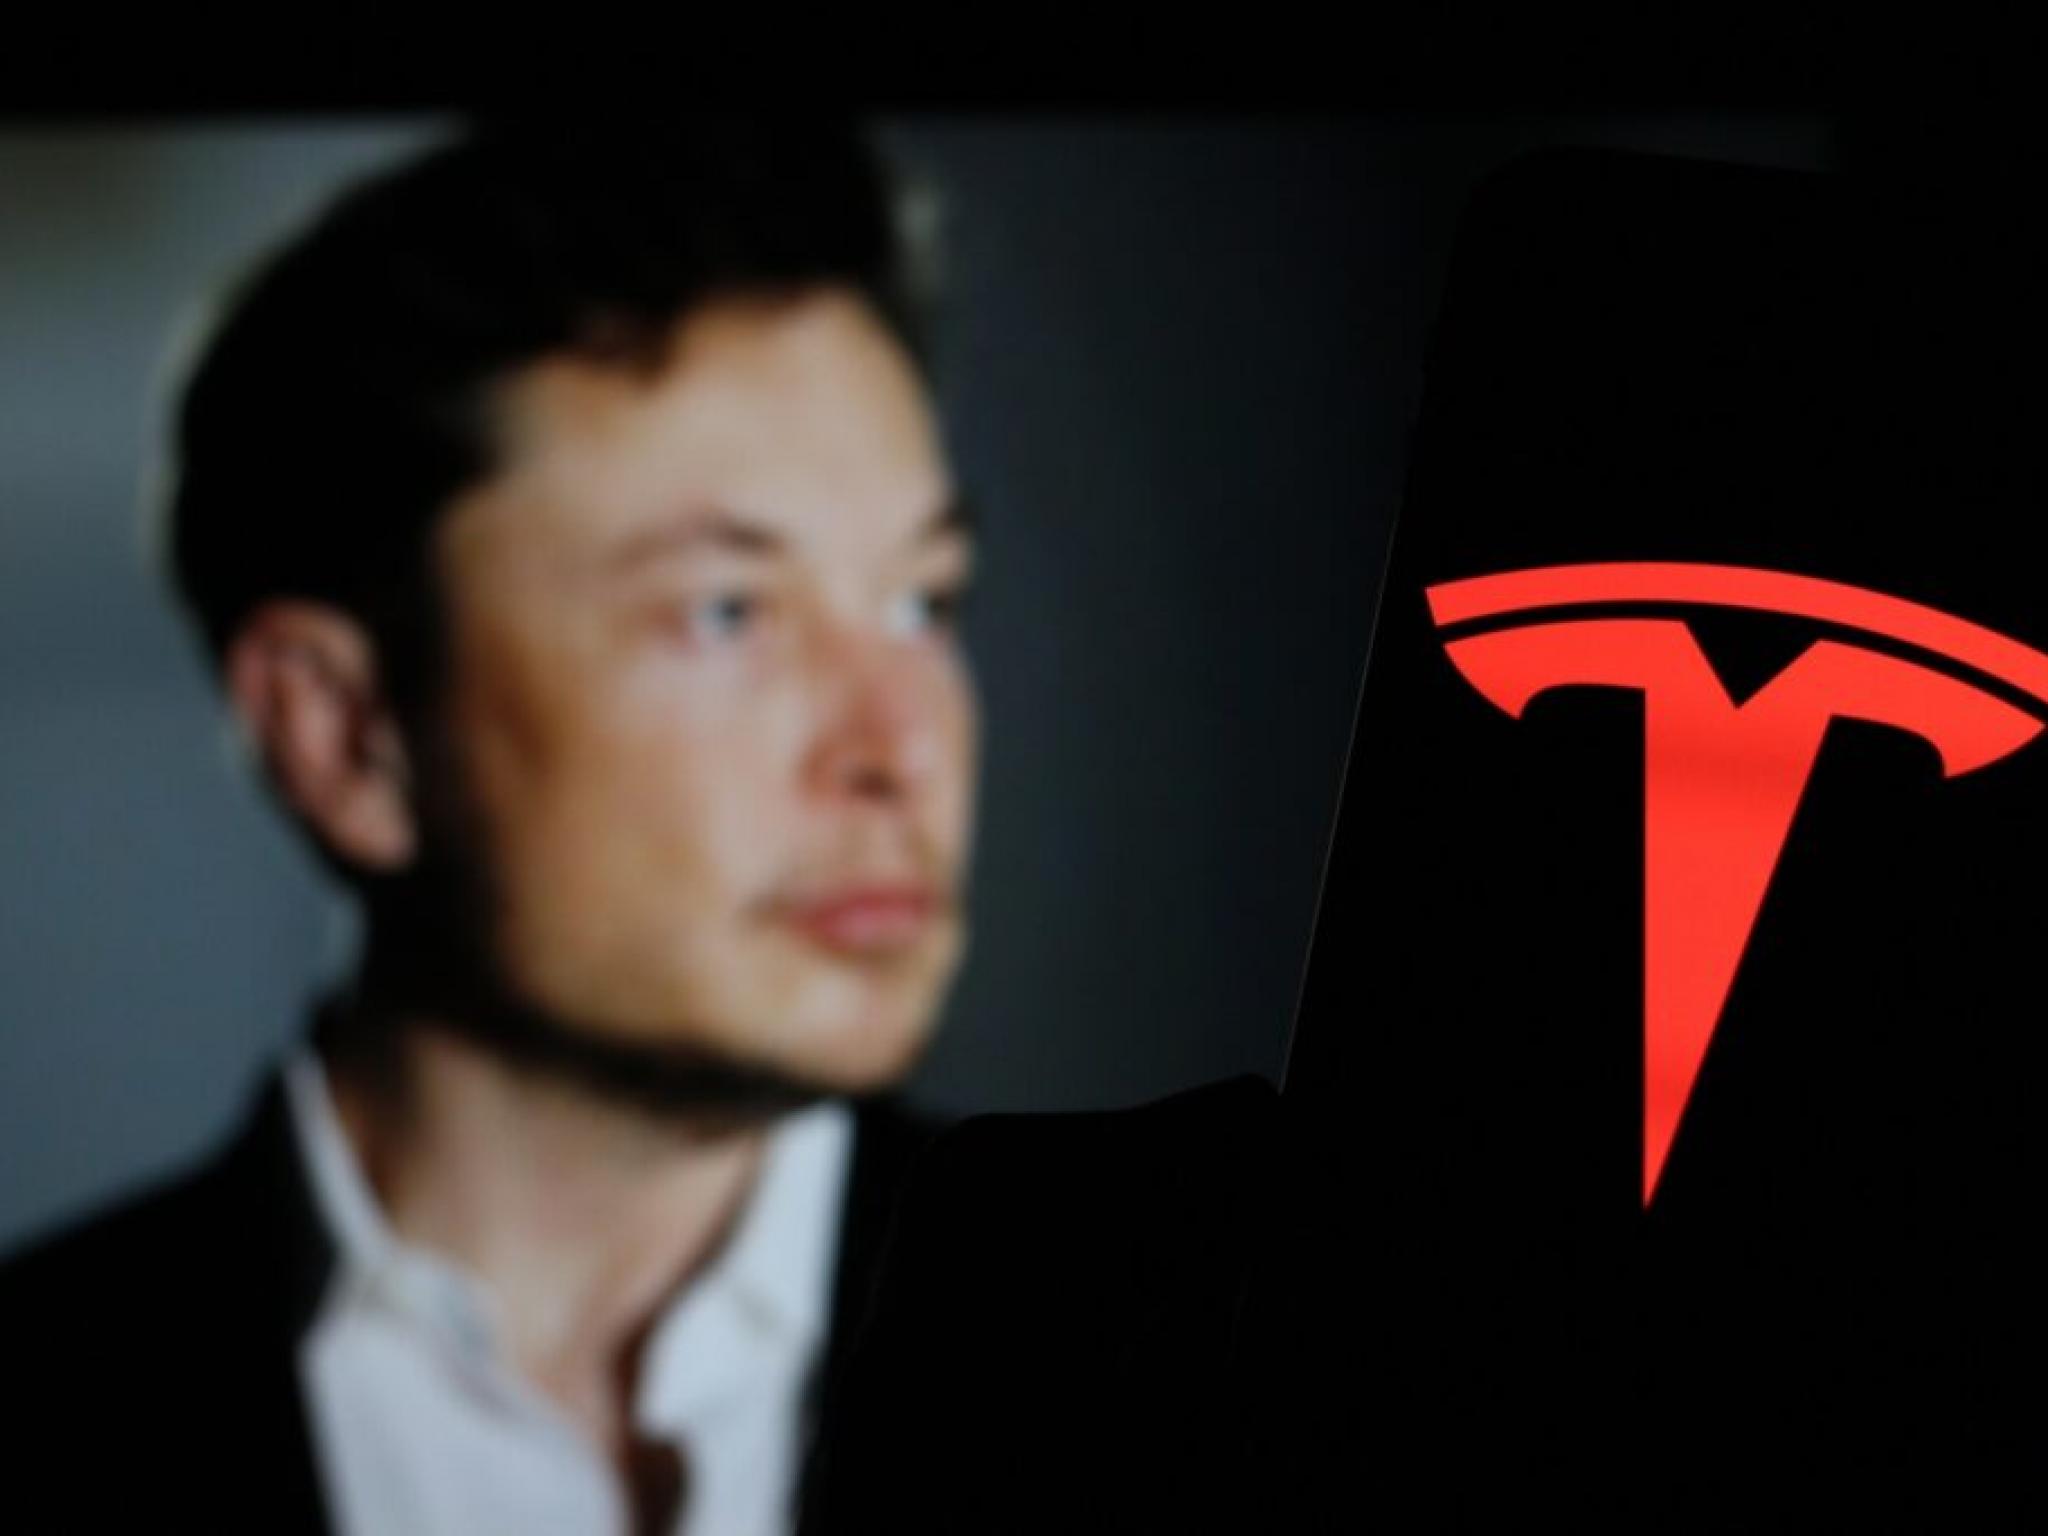  tesla-is-now-enron-folks-facebook-co-founder-claims-musks-ev-giant-is-cooking-up-some-fsd-data 